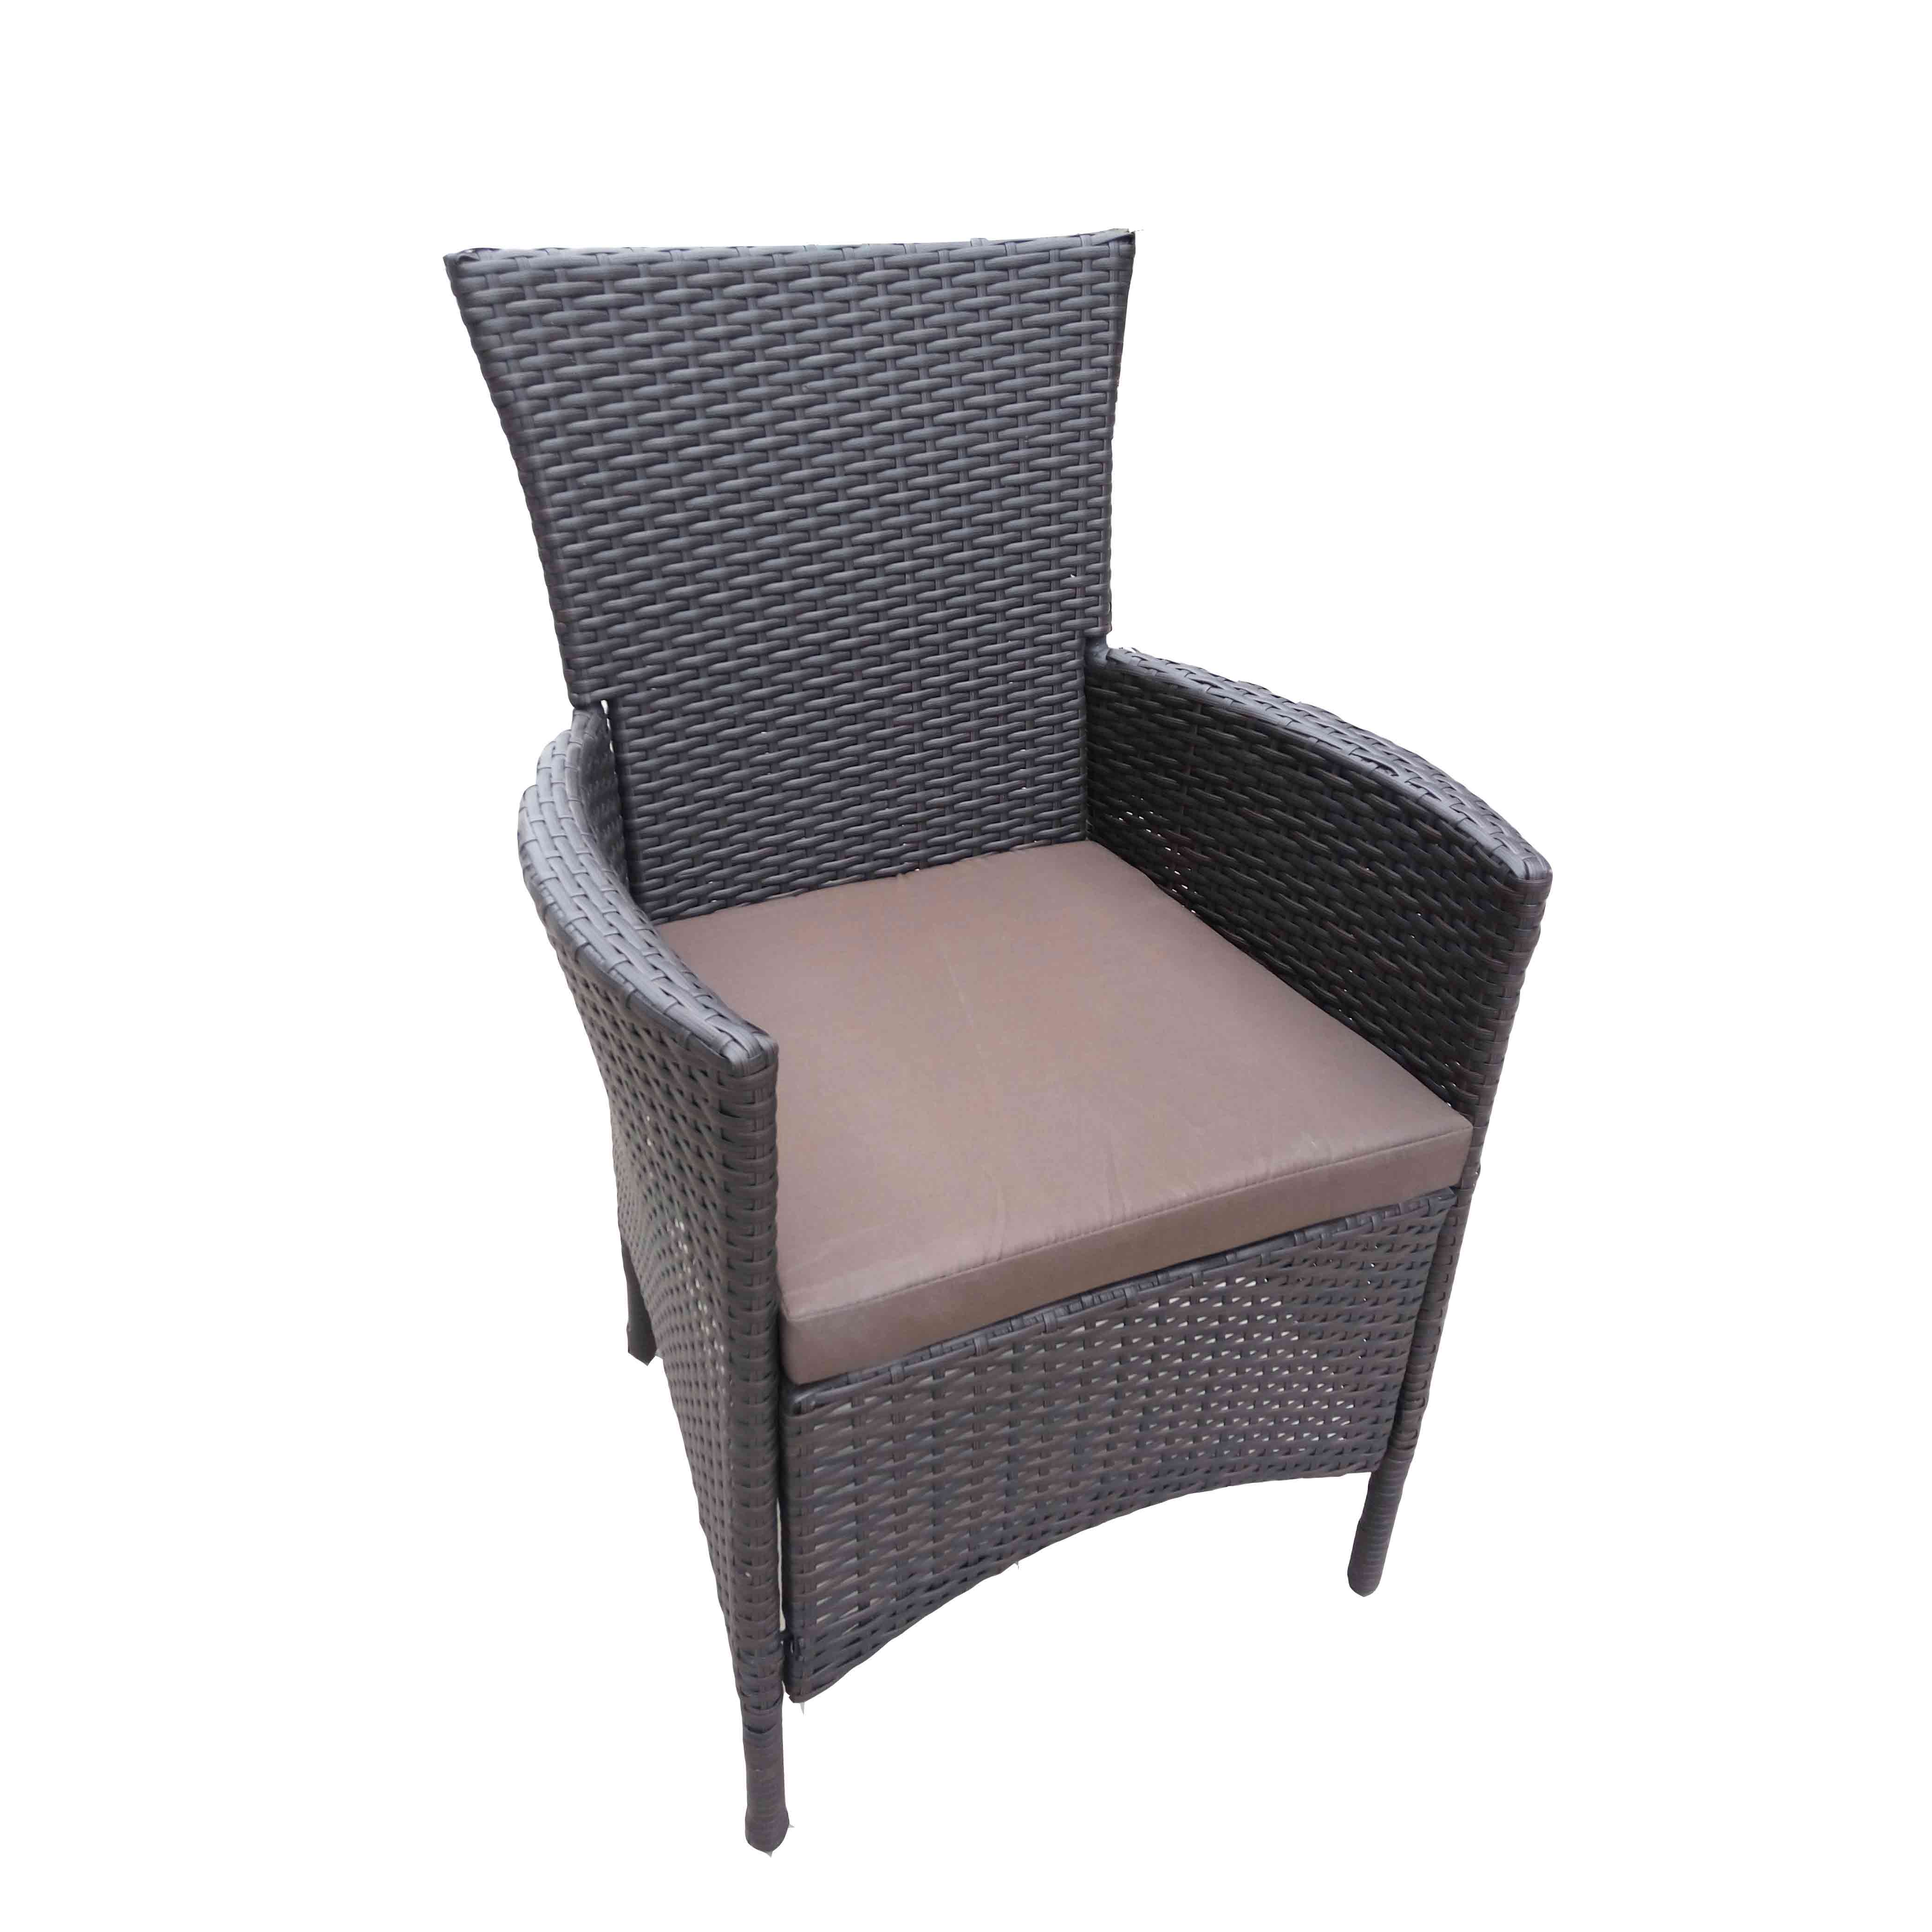 OEM High quality Outdoor Furniture Rattan Chair Factories - JJC3005 Steel Frame Stacking Wicker dinning Chair – Jin-jiang Industry